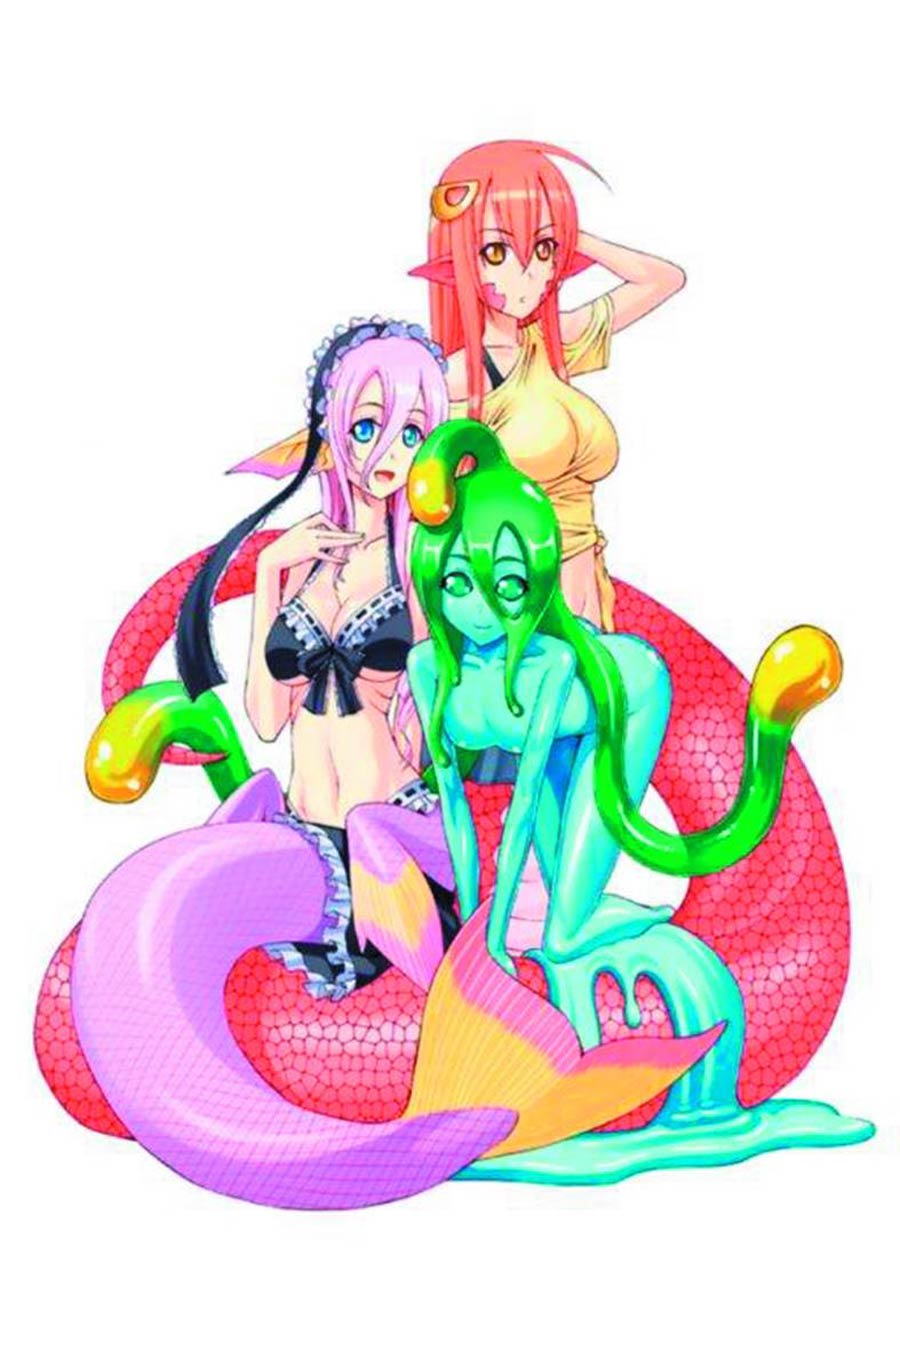 Monster Musume Vol 6 GN